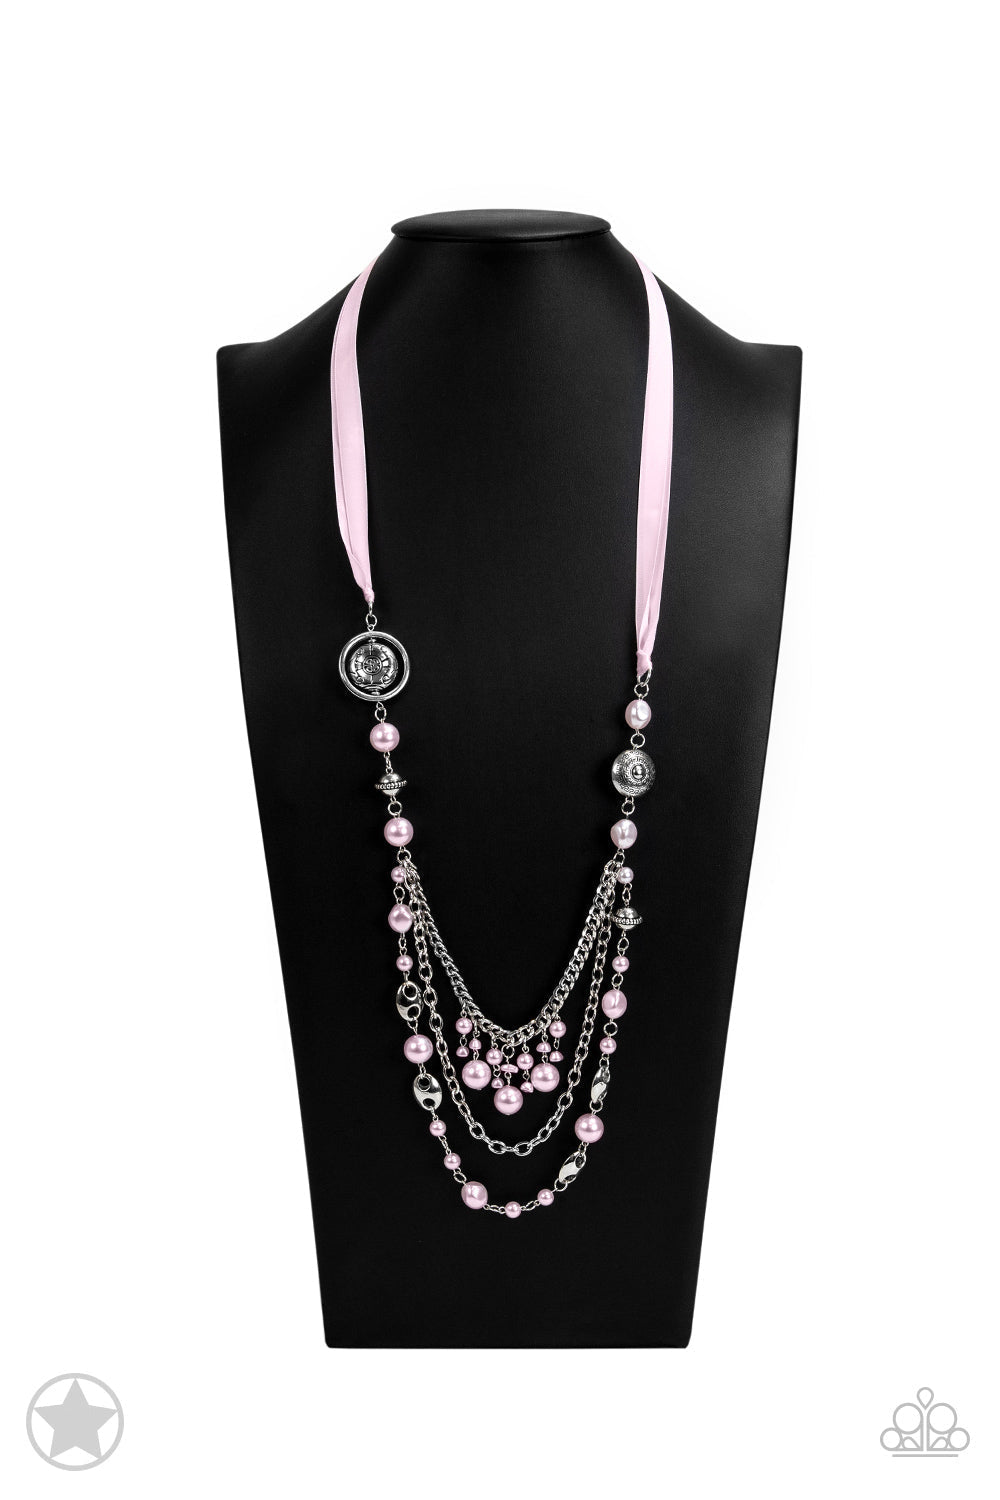 All Trimmings - Pink Pearly and Silver Fashion Necklace - Paparazzi Accessories - A silky pink ribbon replaces a traditional chain for an elegant look. Pearly light pastel pink beads and funky silver pieces with varying lengths of layered silver chains to give a Victorian-inspired look to this stylish necklace.